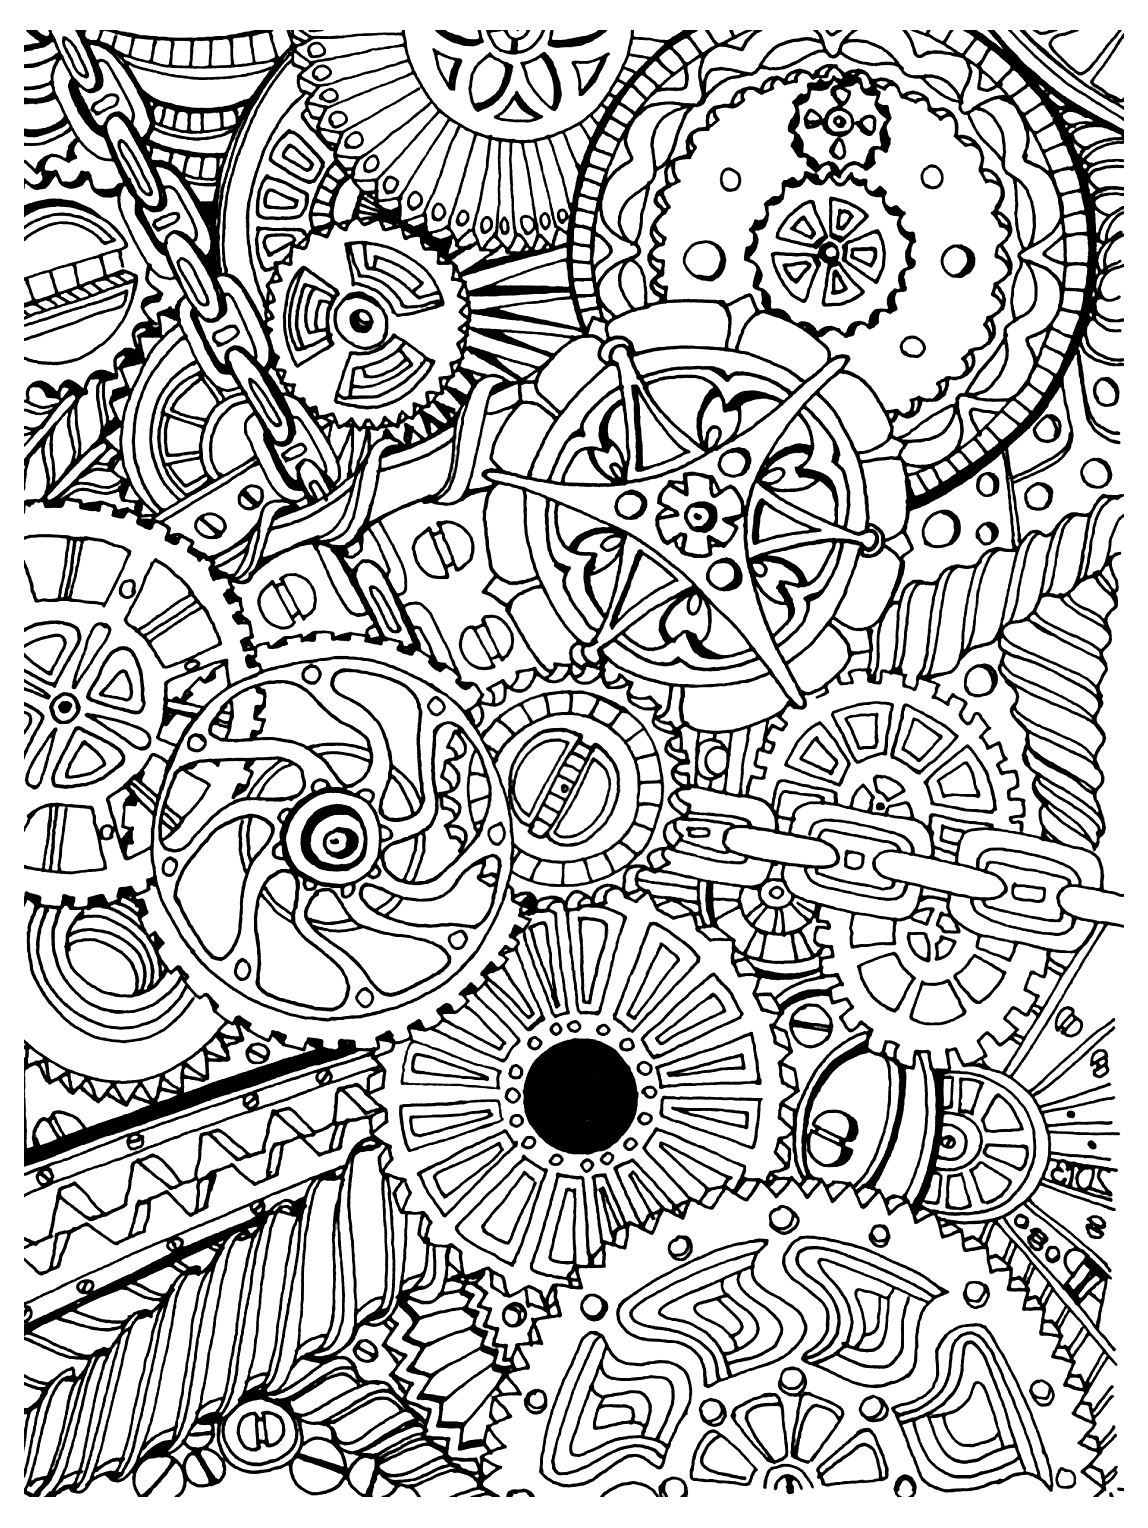 Stress Relief Pattern Tangled Treasures #2 Coloring Page JPG